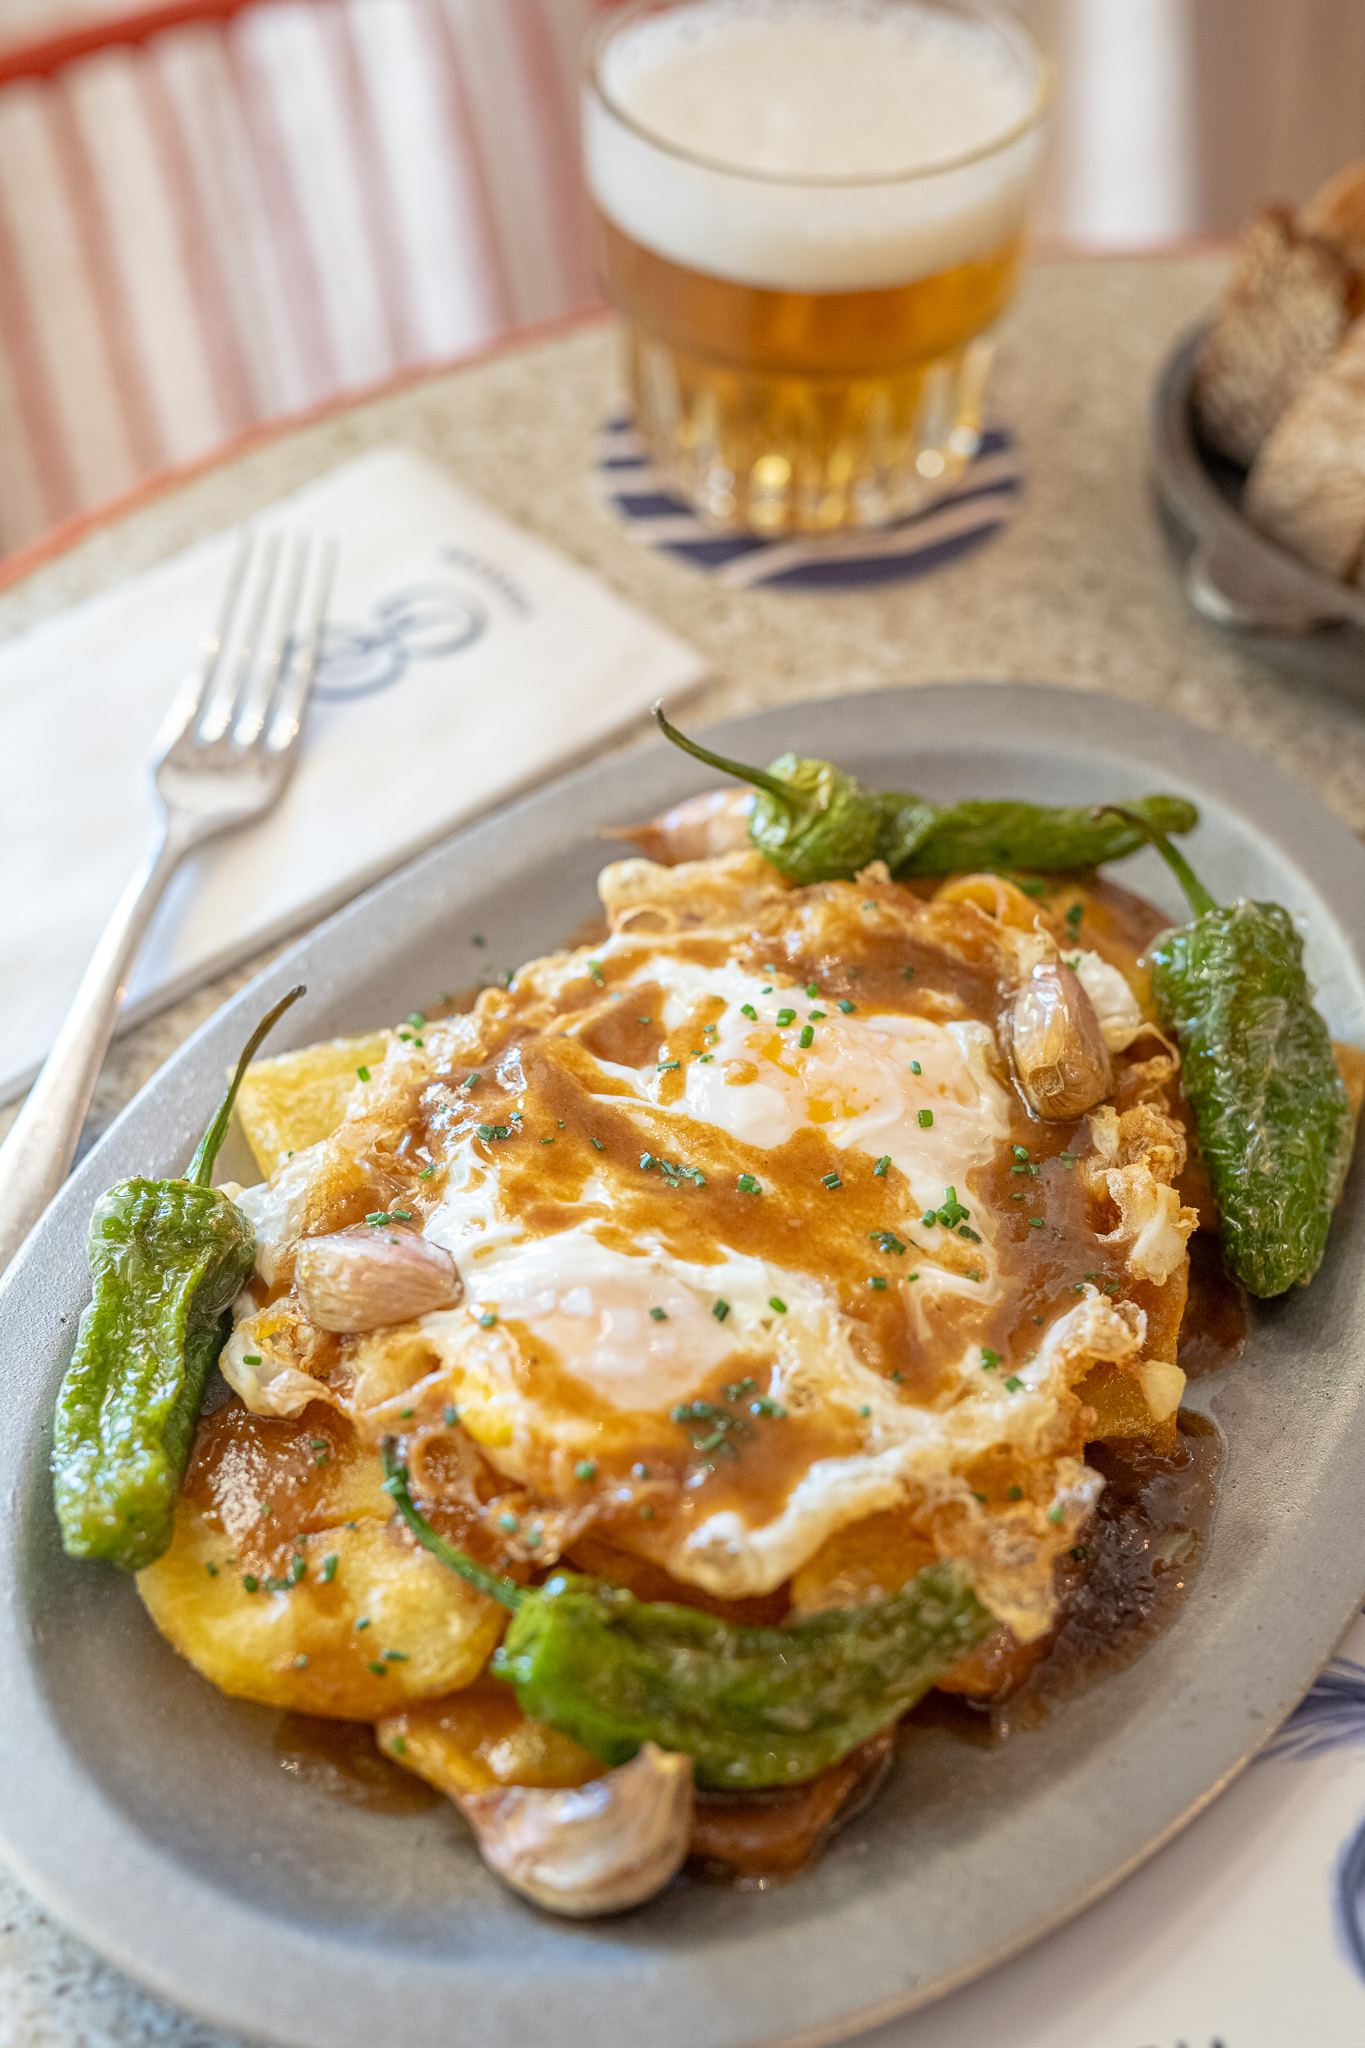 Scrambled eggs with Padrón peppers and whiskey sauce